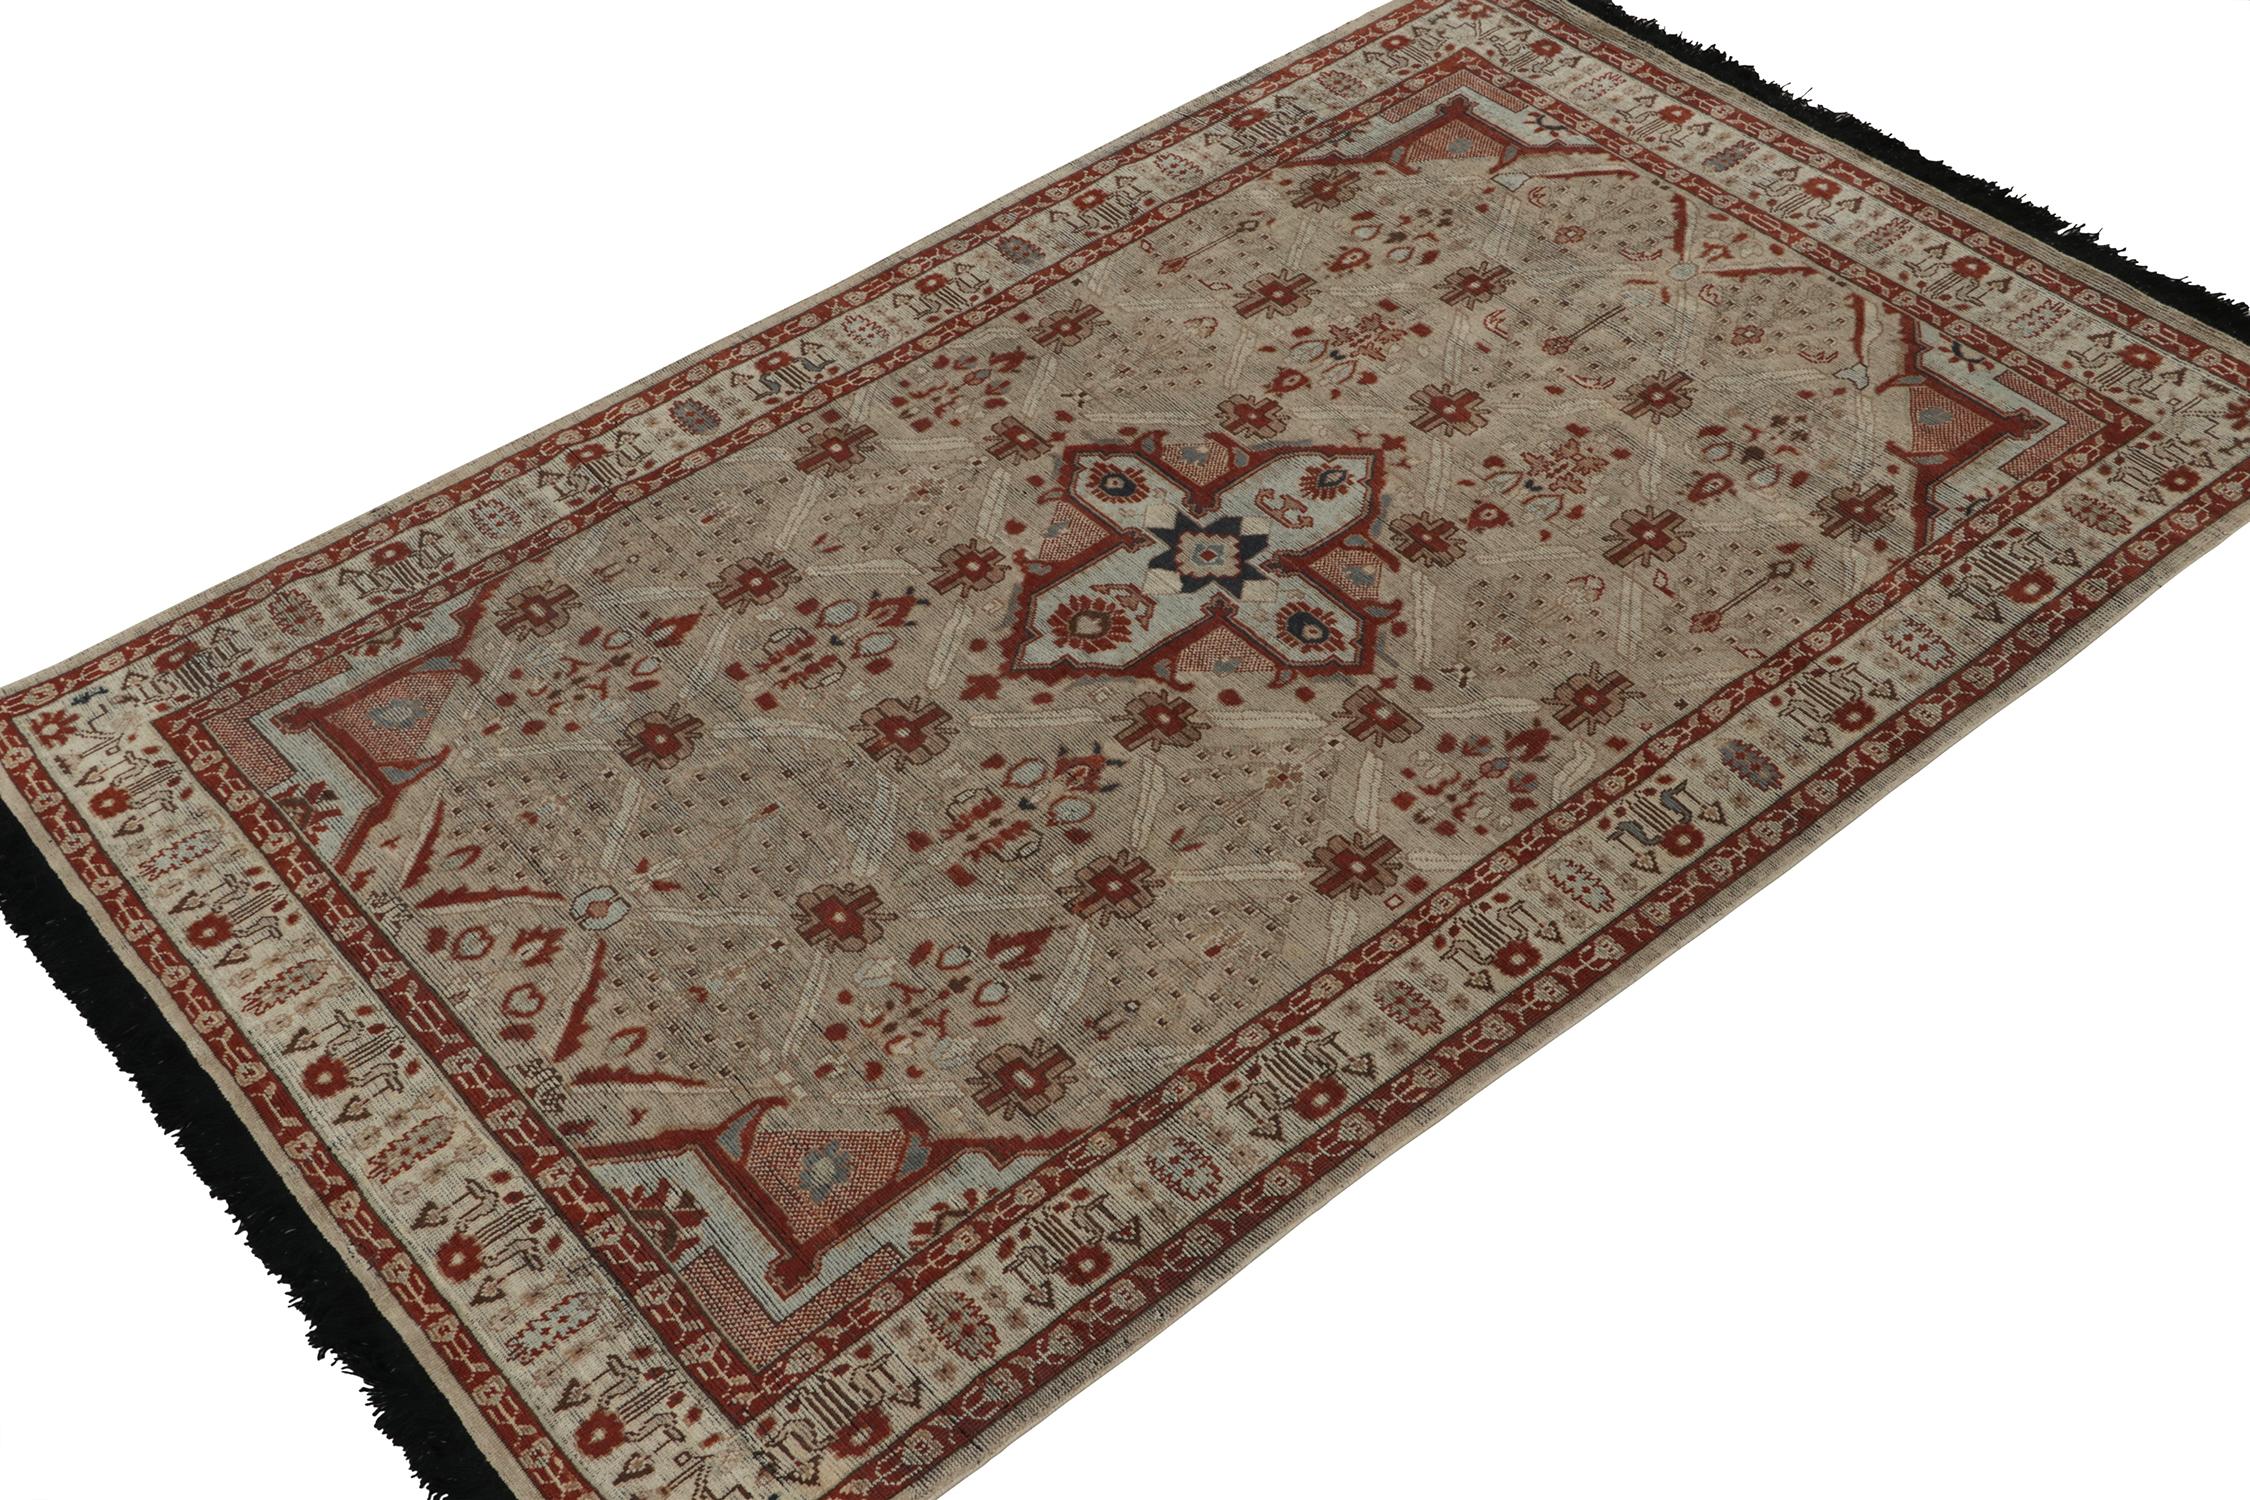 This 6x9 rug is a grand new entry to Rug & Kilim’s custom classics Burano collection. Hand-knotted in Persian wool.
Further on the Design: 
This piece draws on tribal patterns, and revels in rich red and brown on gray with natural movement and